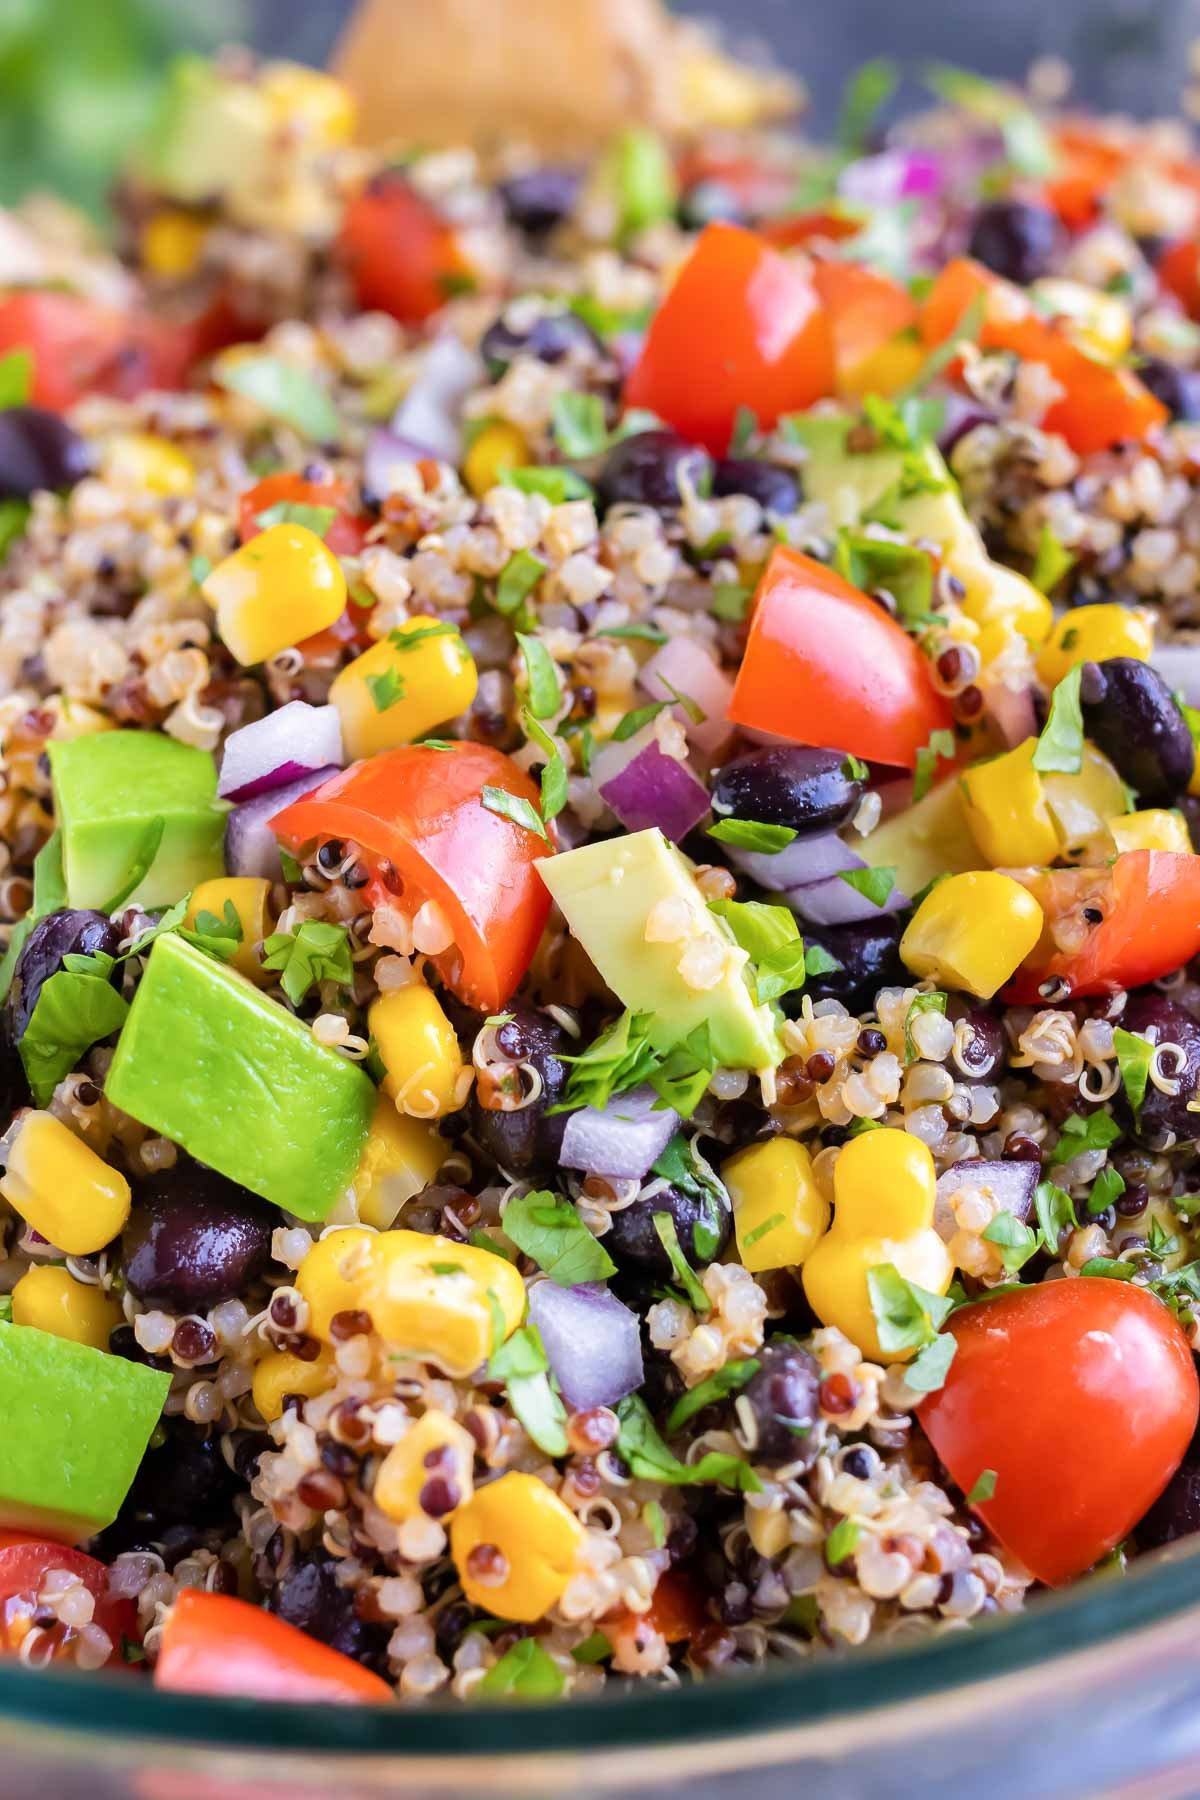 A quick and easy quinoa salad recipe with Mexican spices, avocado, and black beans.